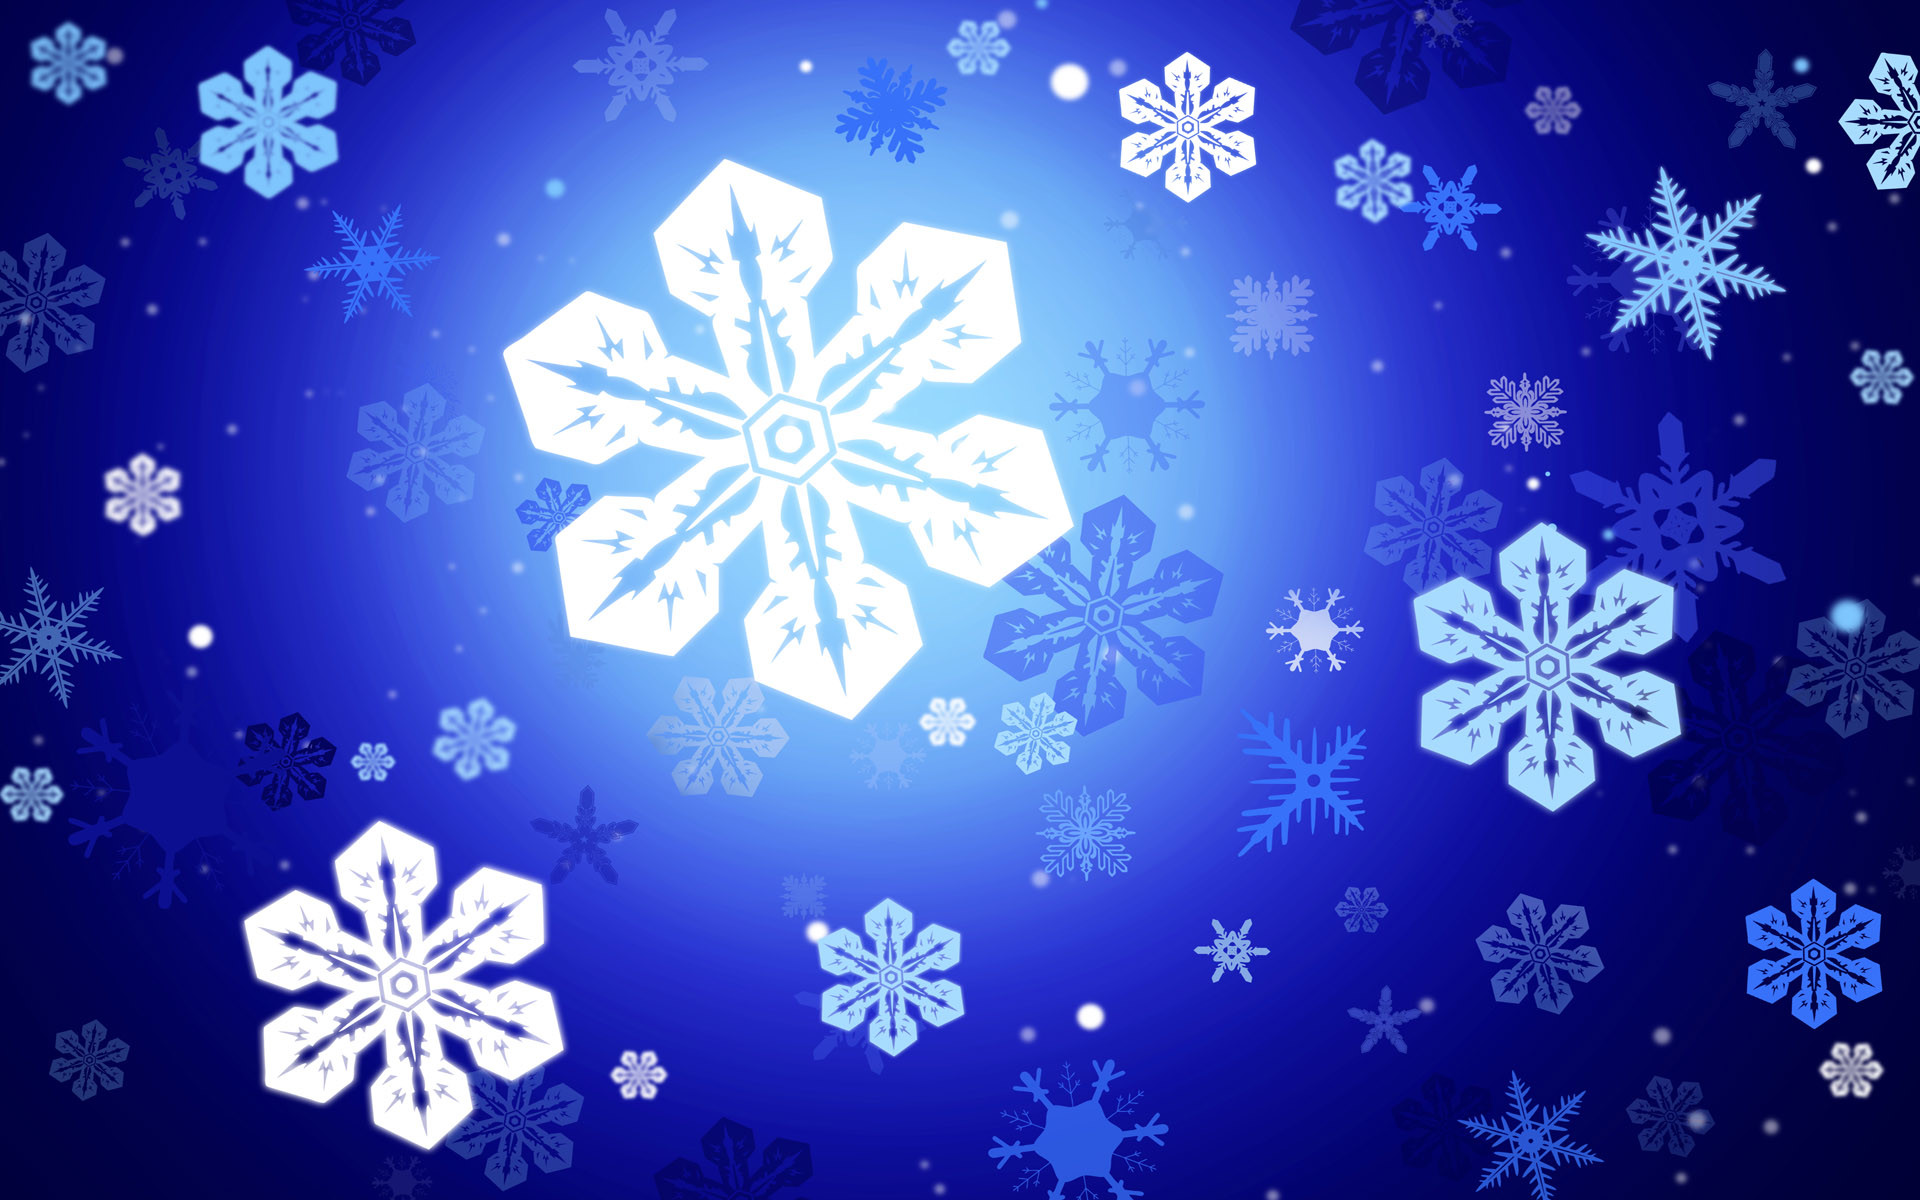 Snow Animated Background Free Snowy Animated Cliparts Download Free Snowy Animated Cliparts